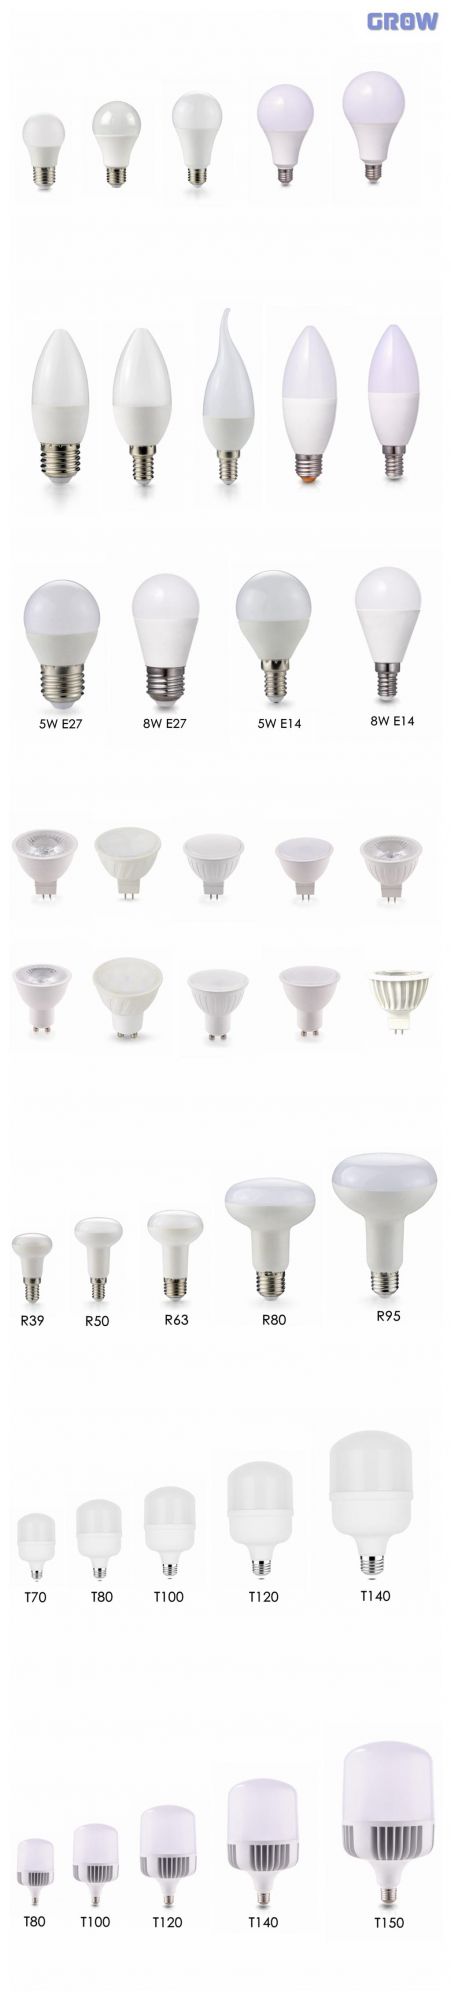 LED Bulb Hot Sale GU10/MR16 7W 8W 9W Best Price Good Quality with Energy Saving Lamp LED Light Spotlight with CE RoHS ERP Approval